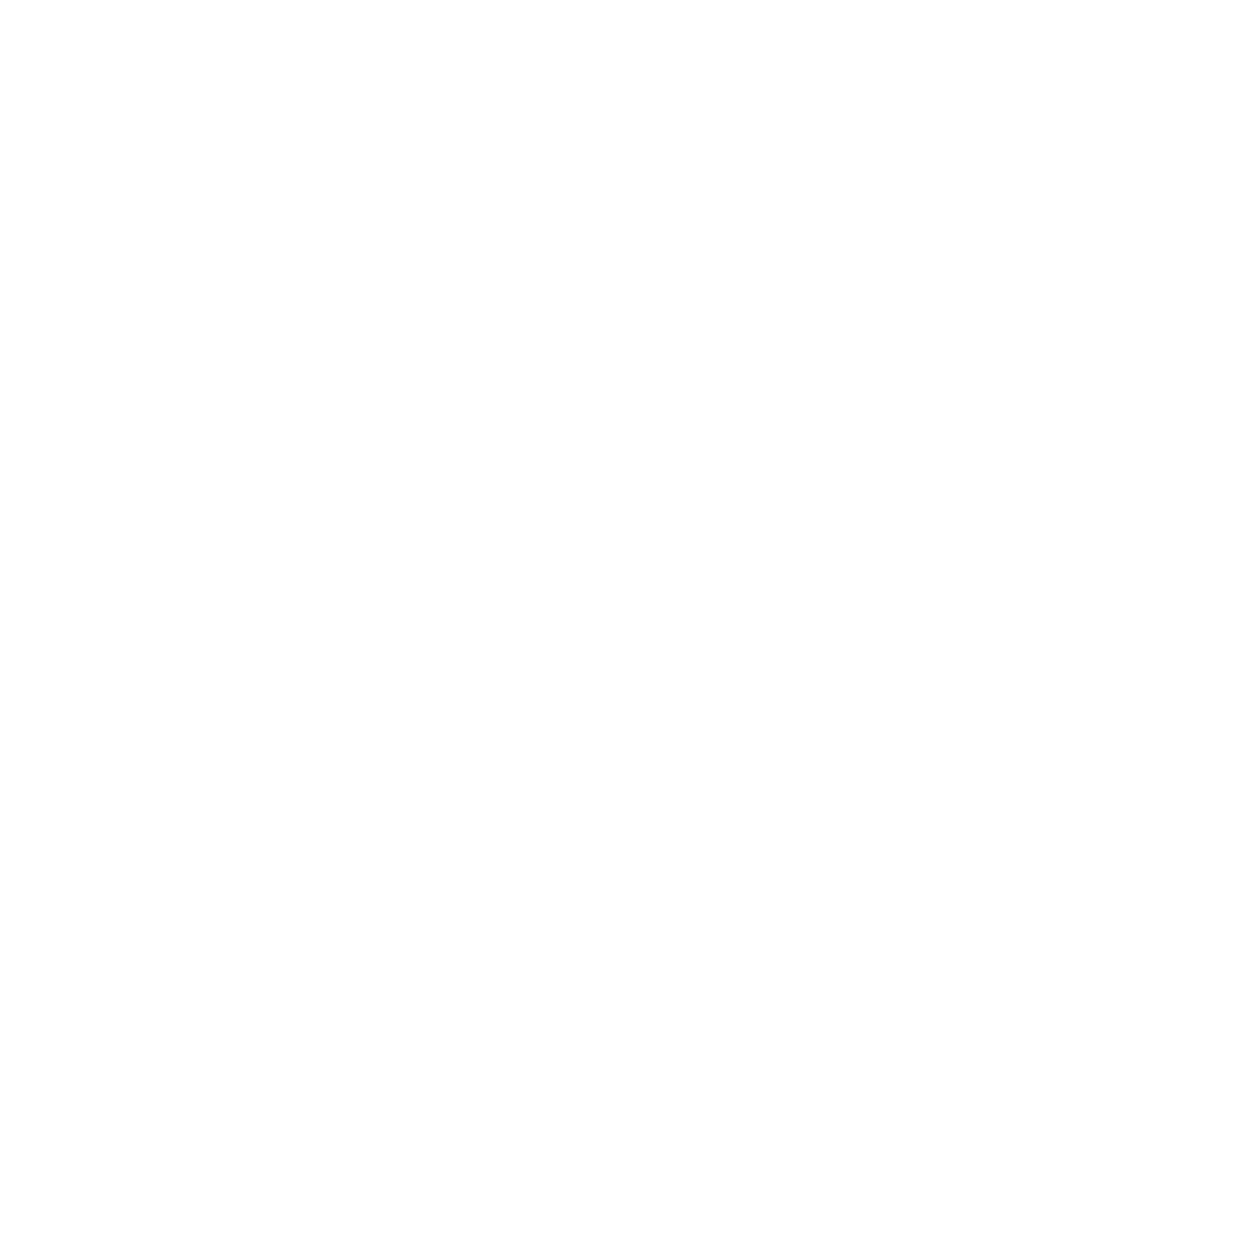 Brickmakers Quality Charter 3-Star Certification